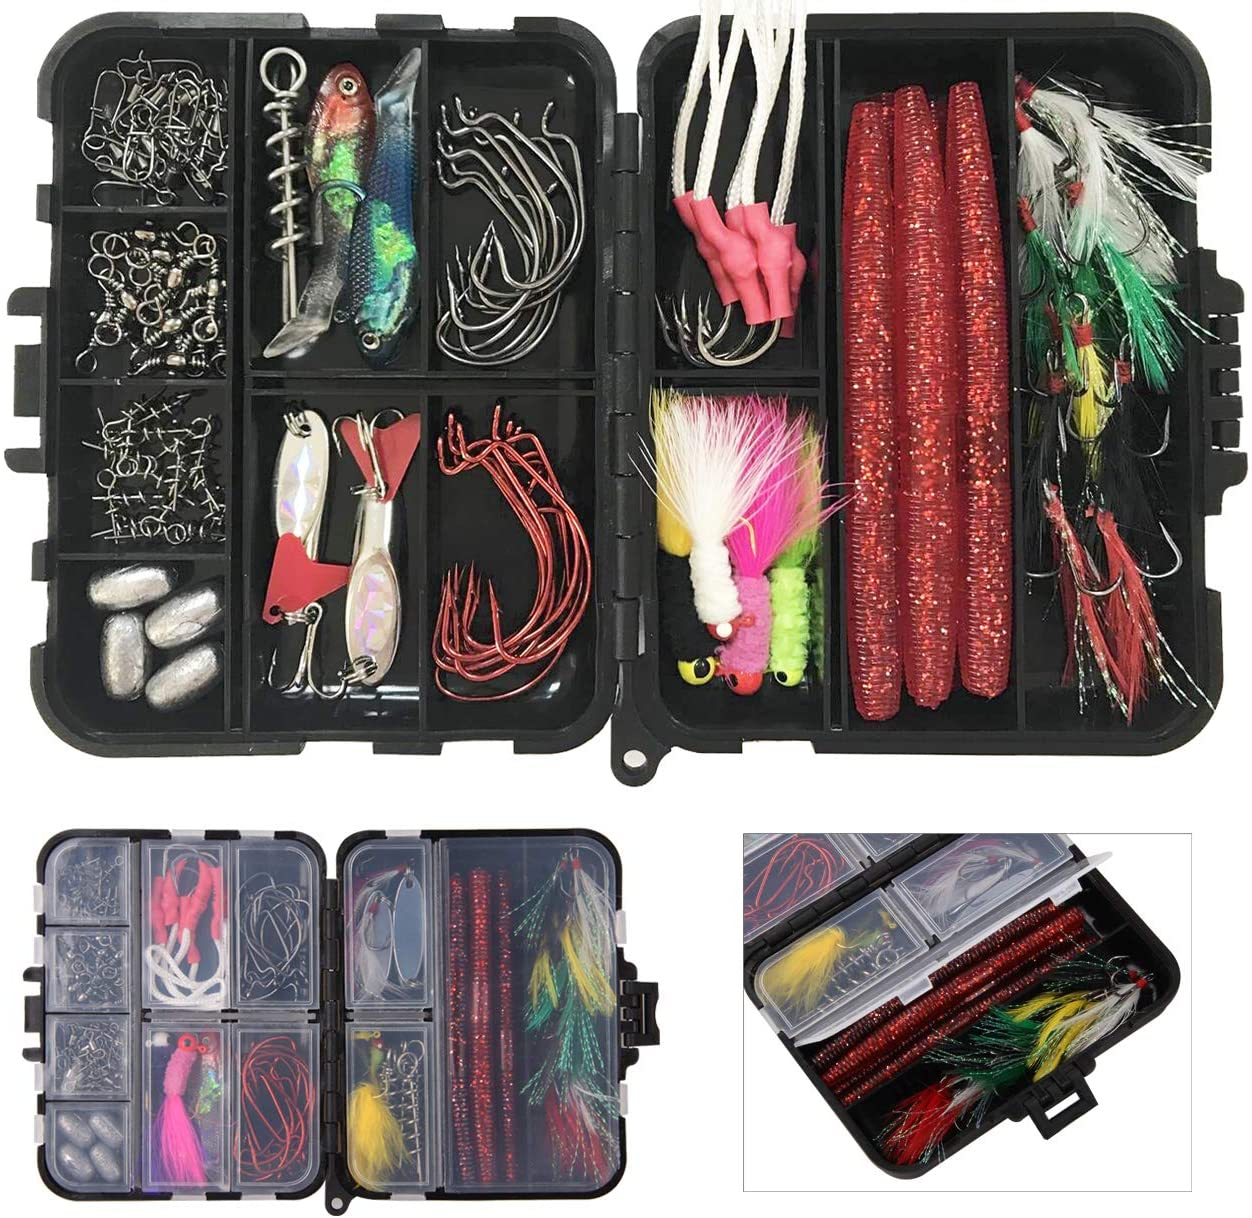 Fishing Lures Hooks Kit 100Pcs Fishing Tackle Box Include Soft Plastic Baits Crappie Jig Heads Bass Jig Hooks Metal Spoons Egg Sinkers Weights Swivels Fishing Tackle Accessories